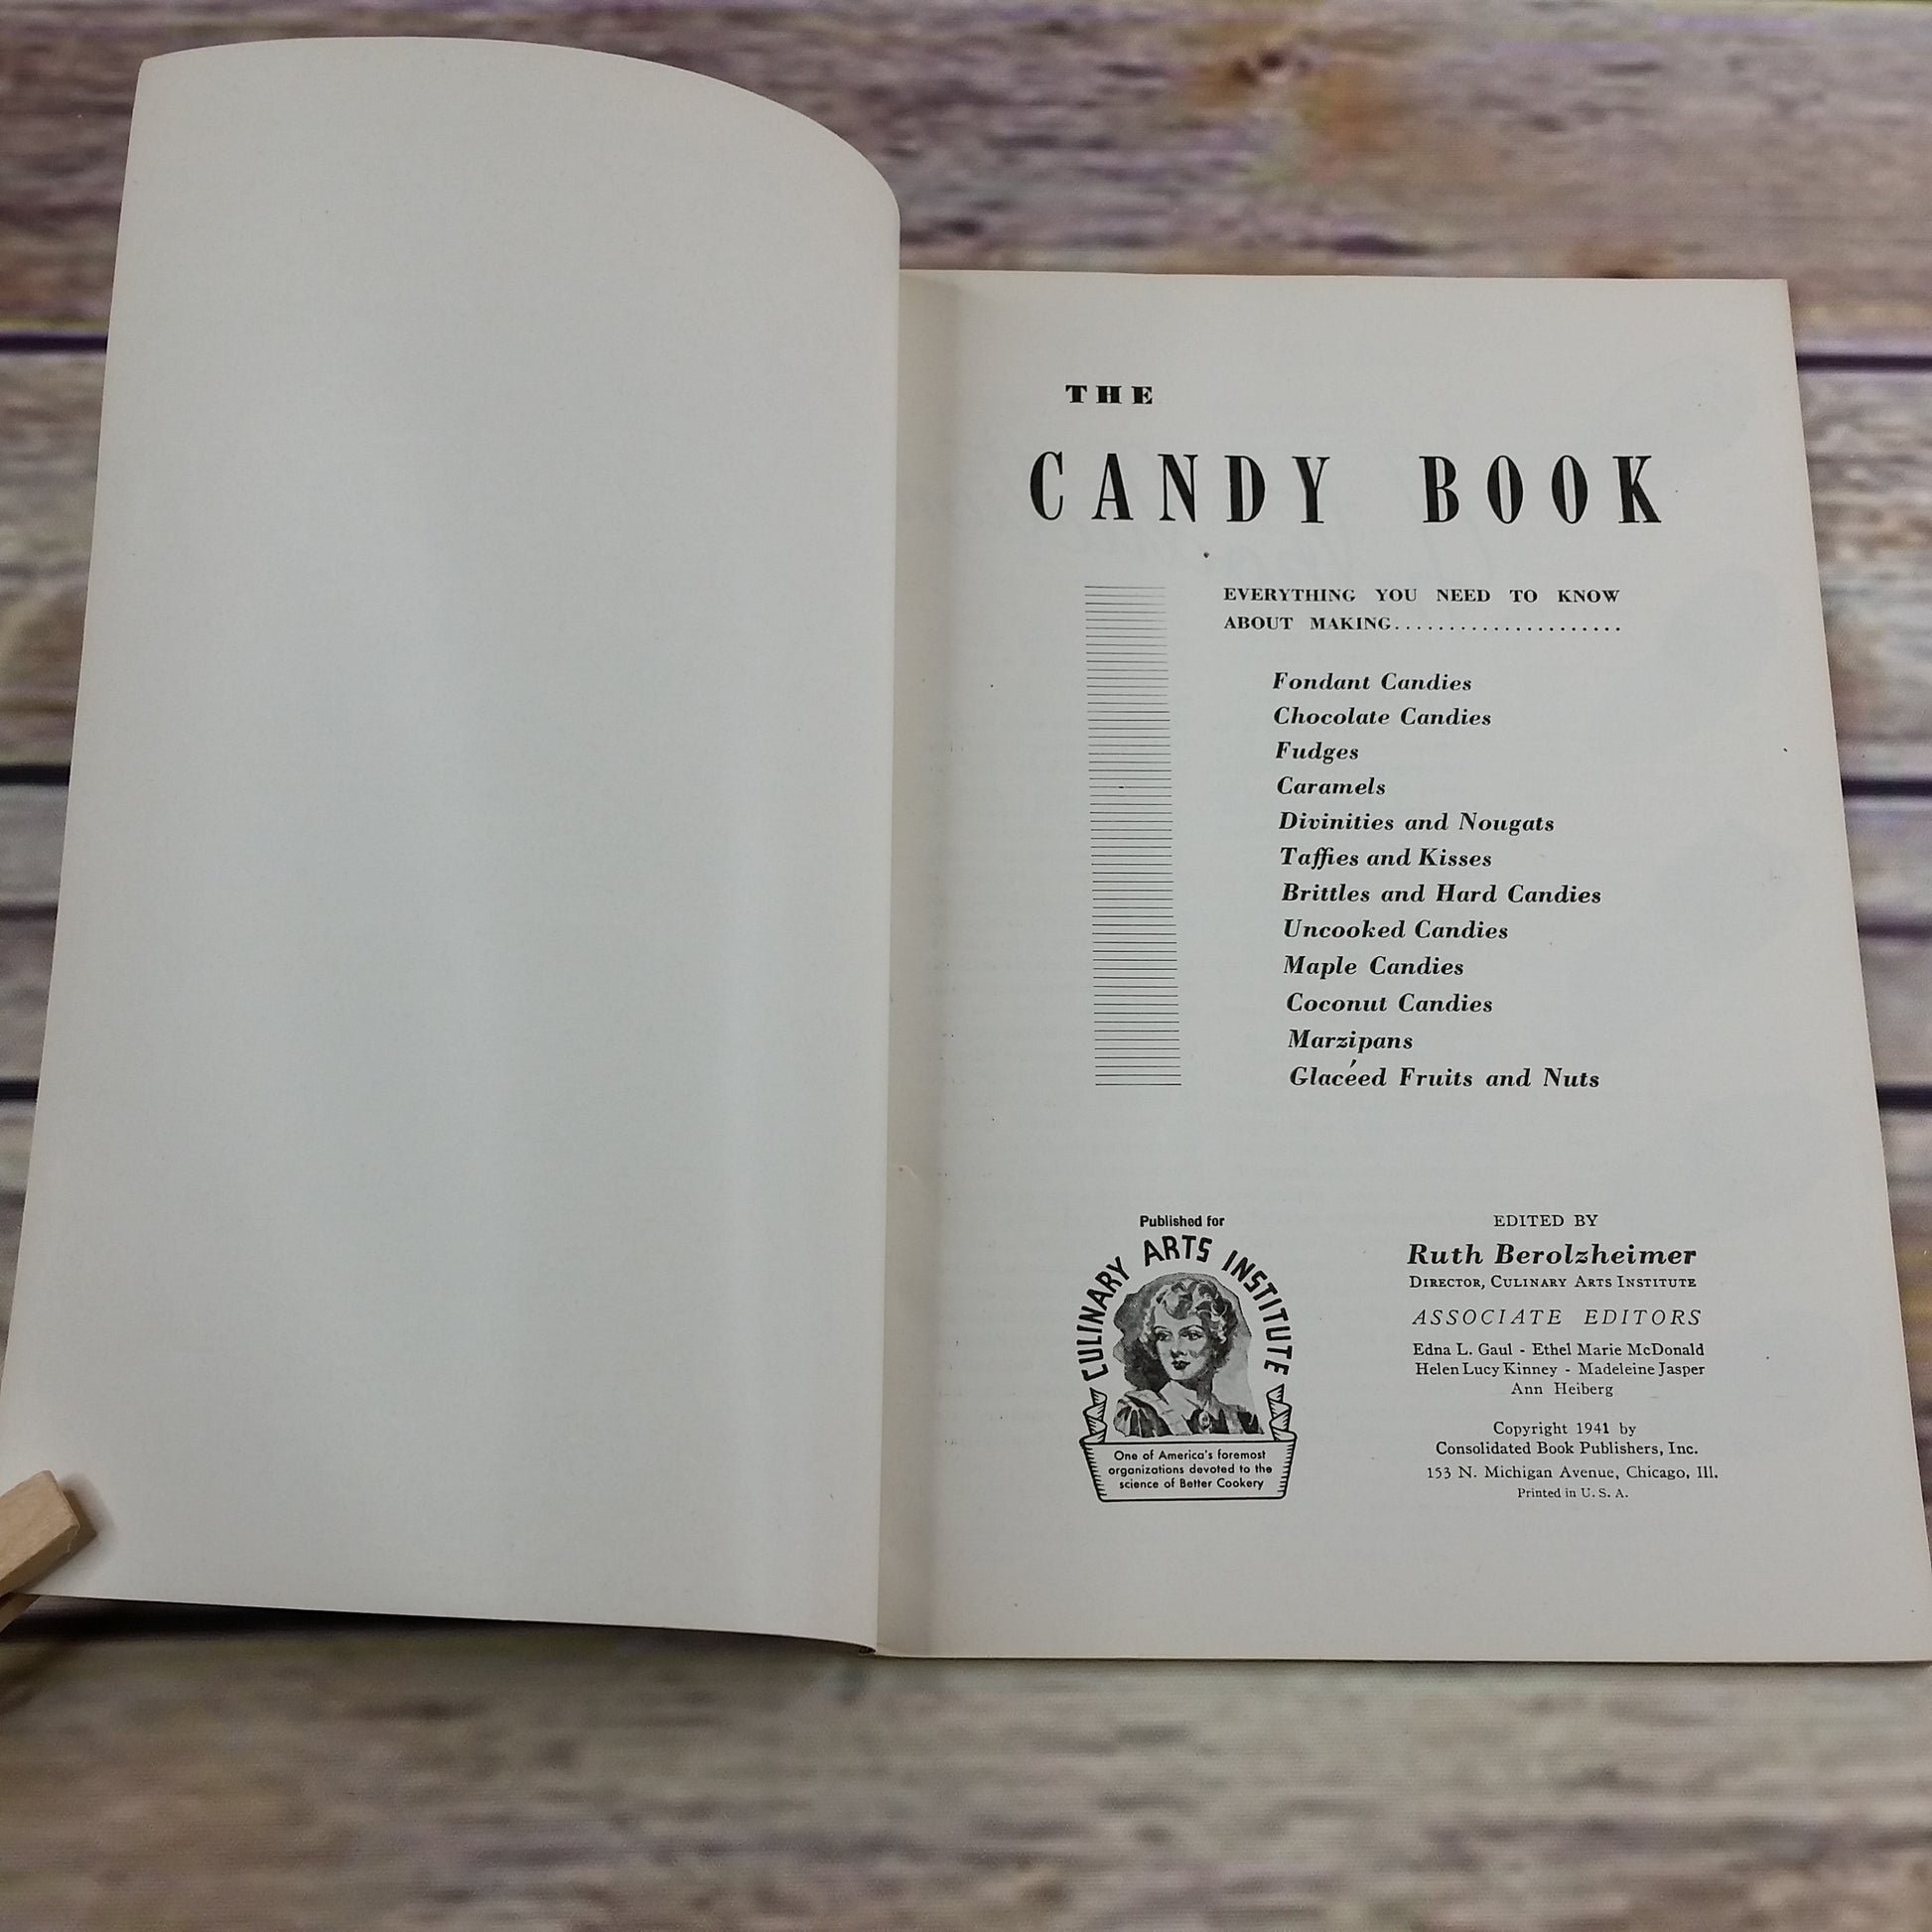 Vintage The Candy Book Culinary Arts Institute 1941 Ruth Berolzheimer Paperback Holiday Cookbook Booklet - At Grandma's Table